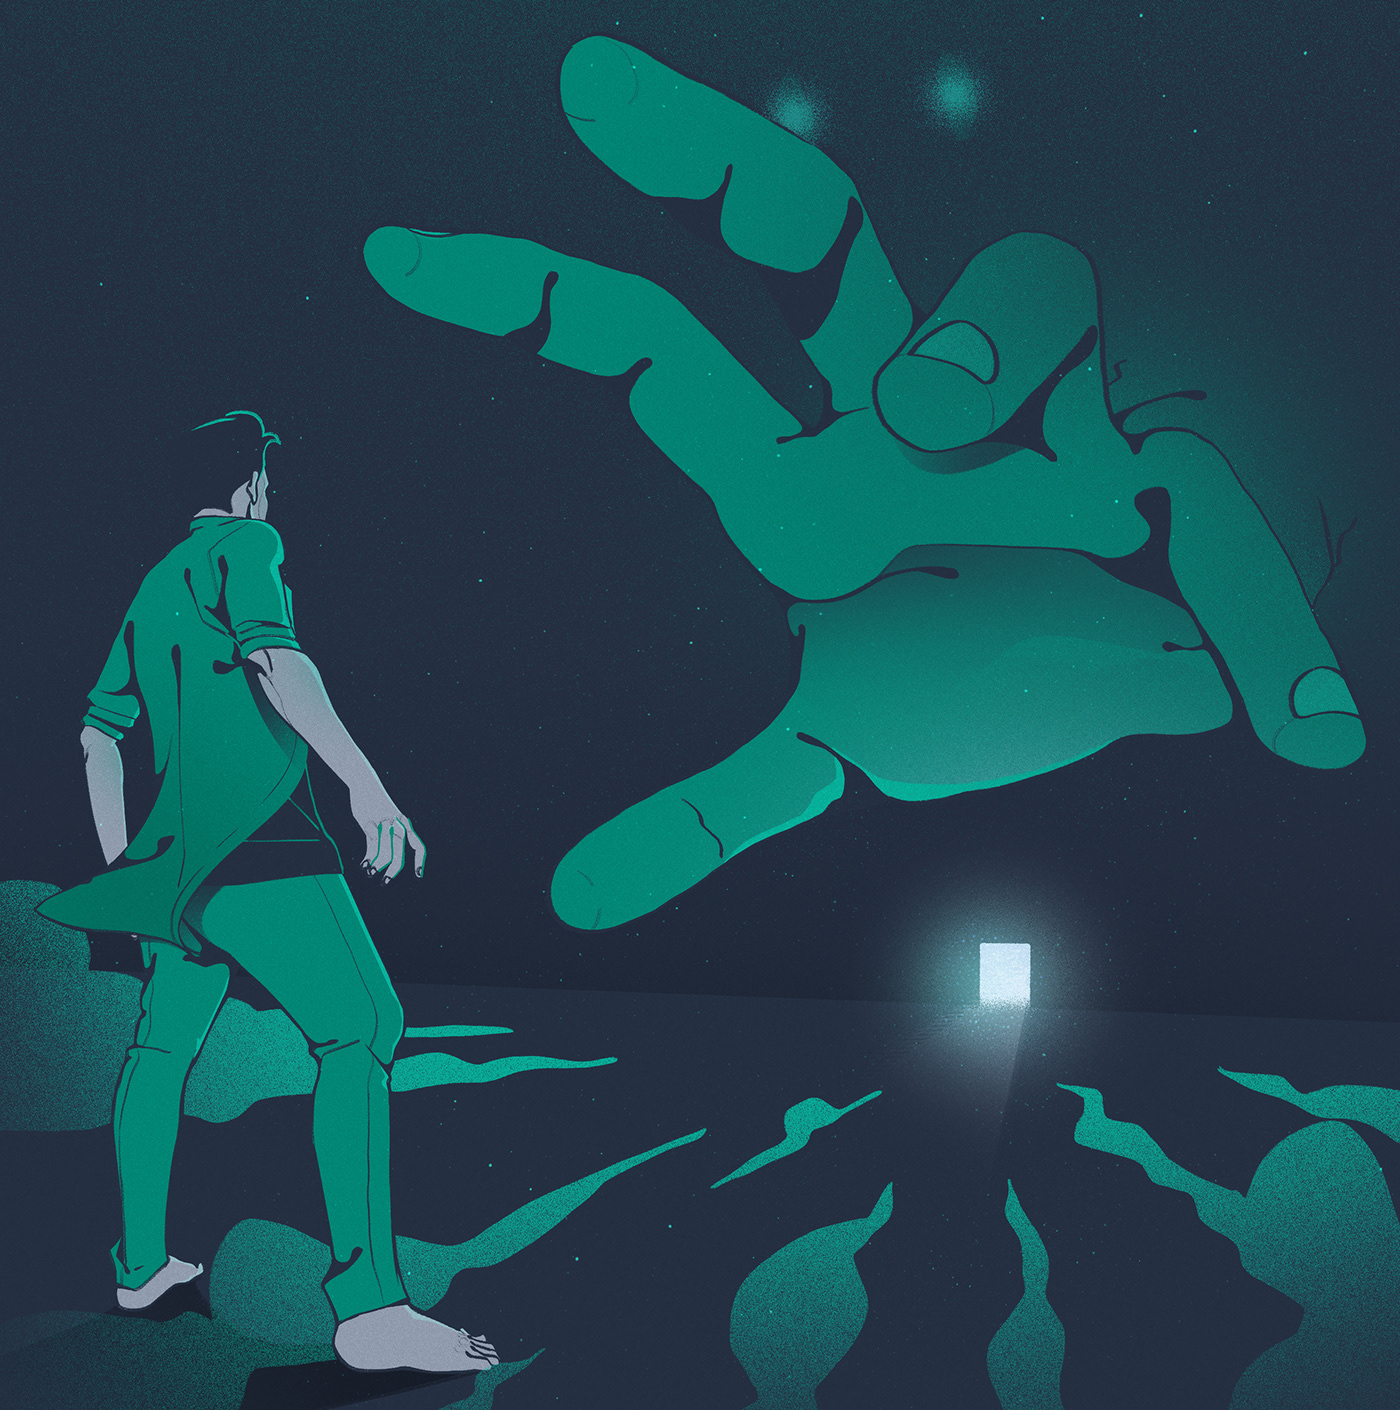 Illustration of a huge hand reaching to a man trying to block him from going forward